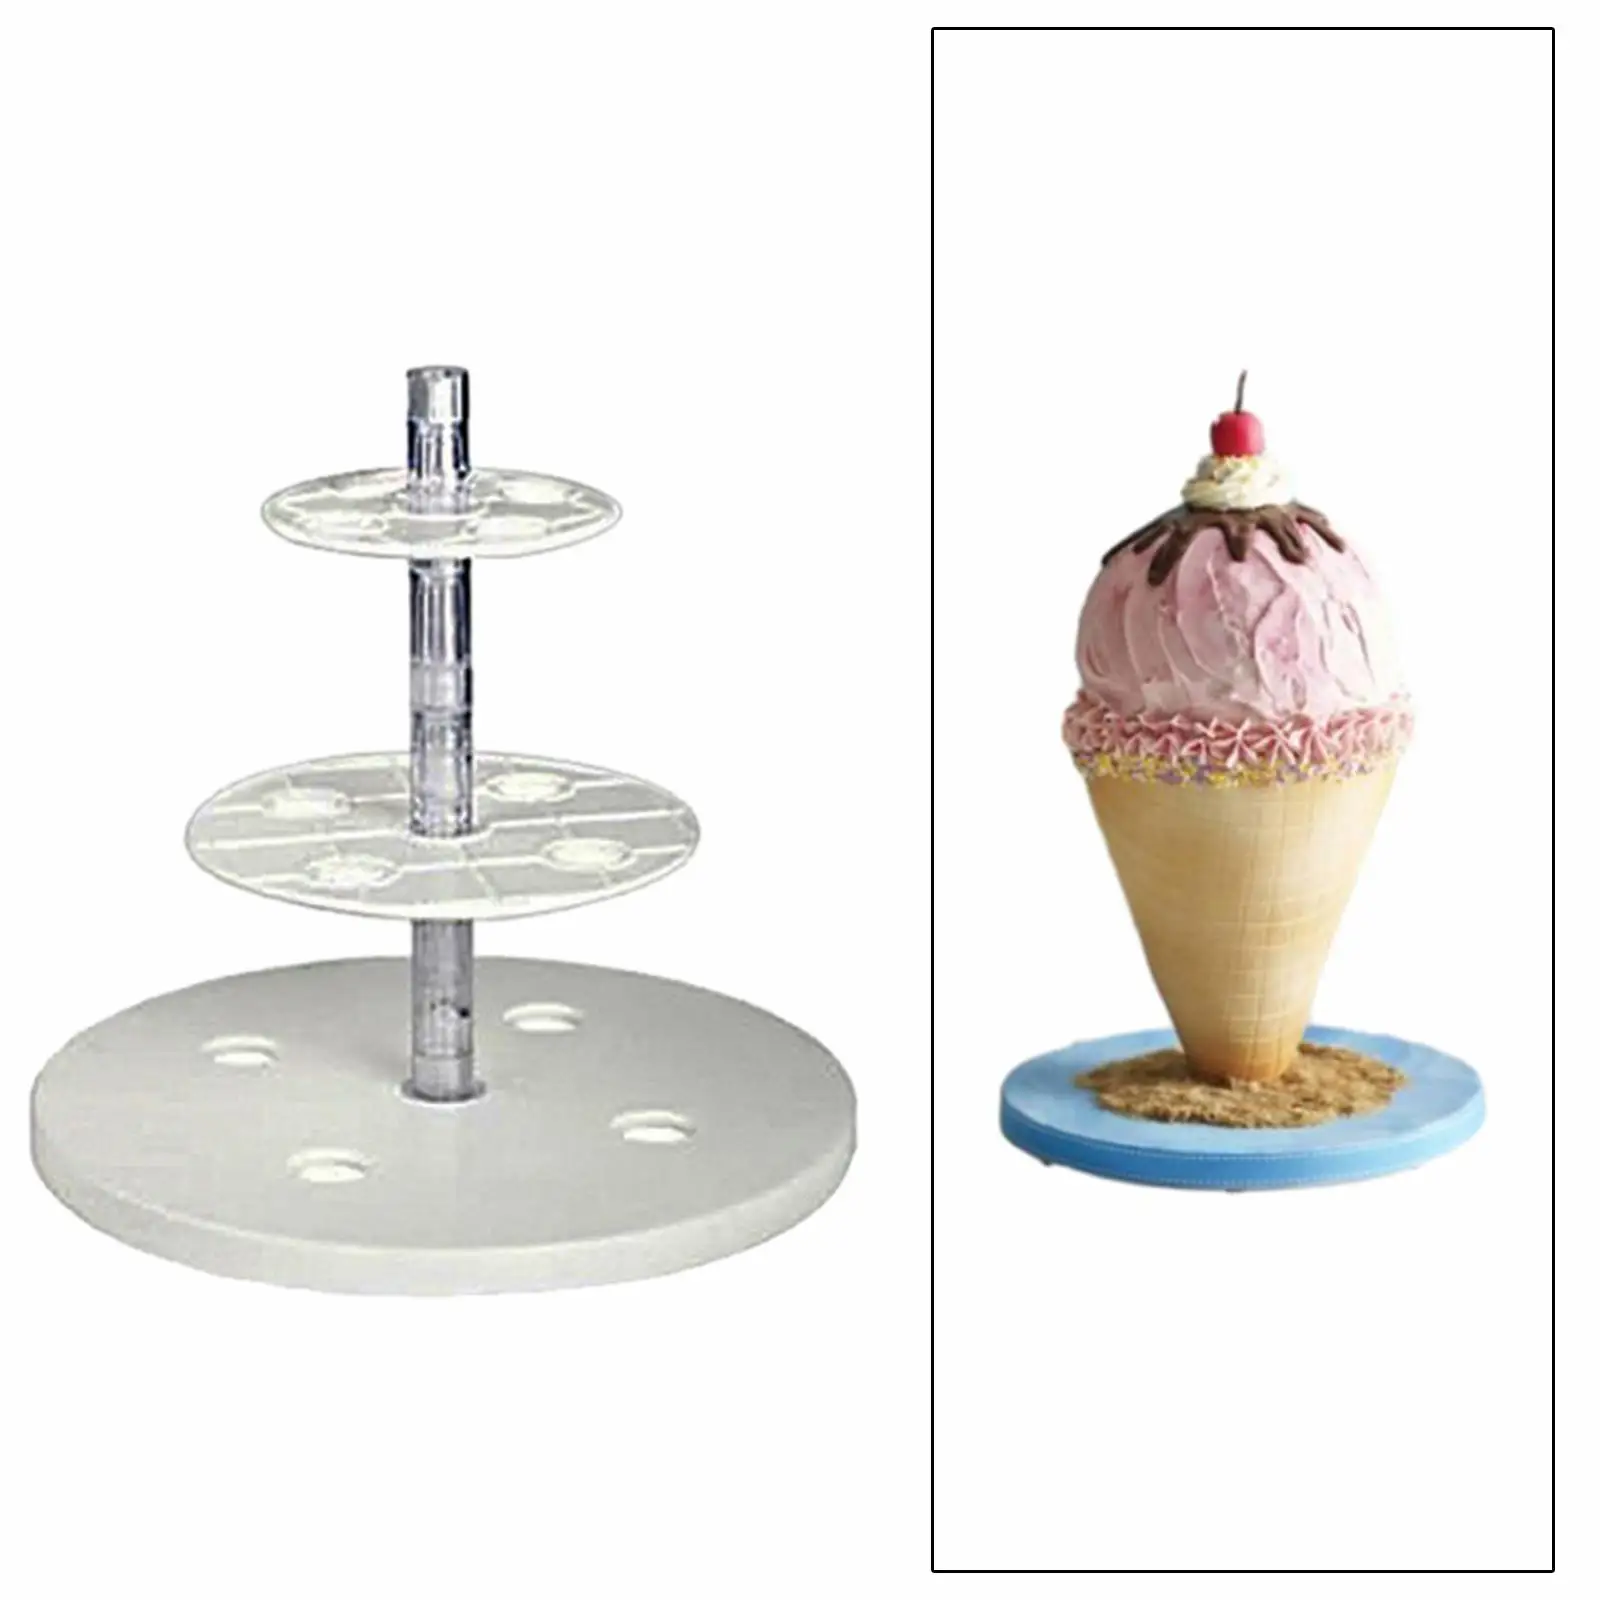 3 Tier Cake Stand Pastry Stand Pouring Cake Stand Centerpiece Tier Cake Support for Wedding Birthday Parties Celebration Cupcake